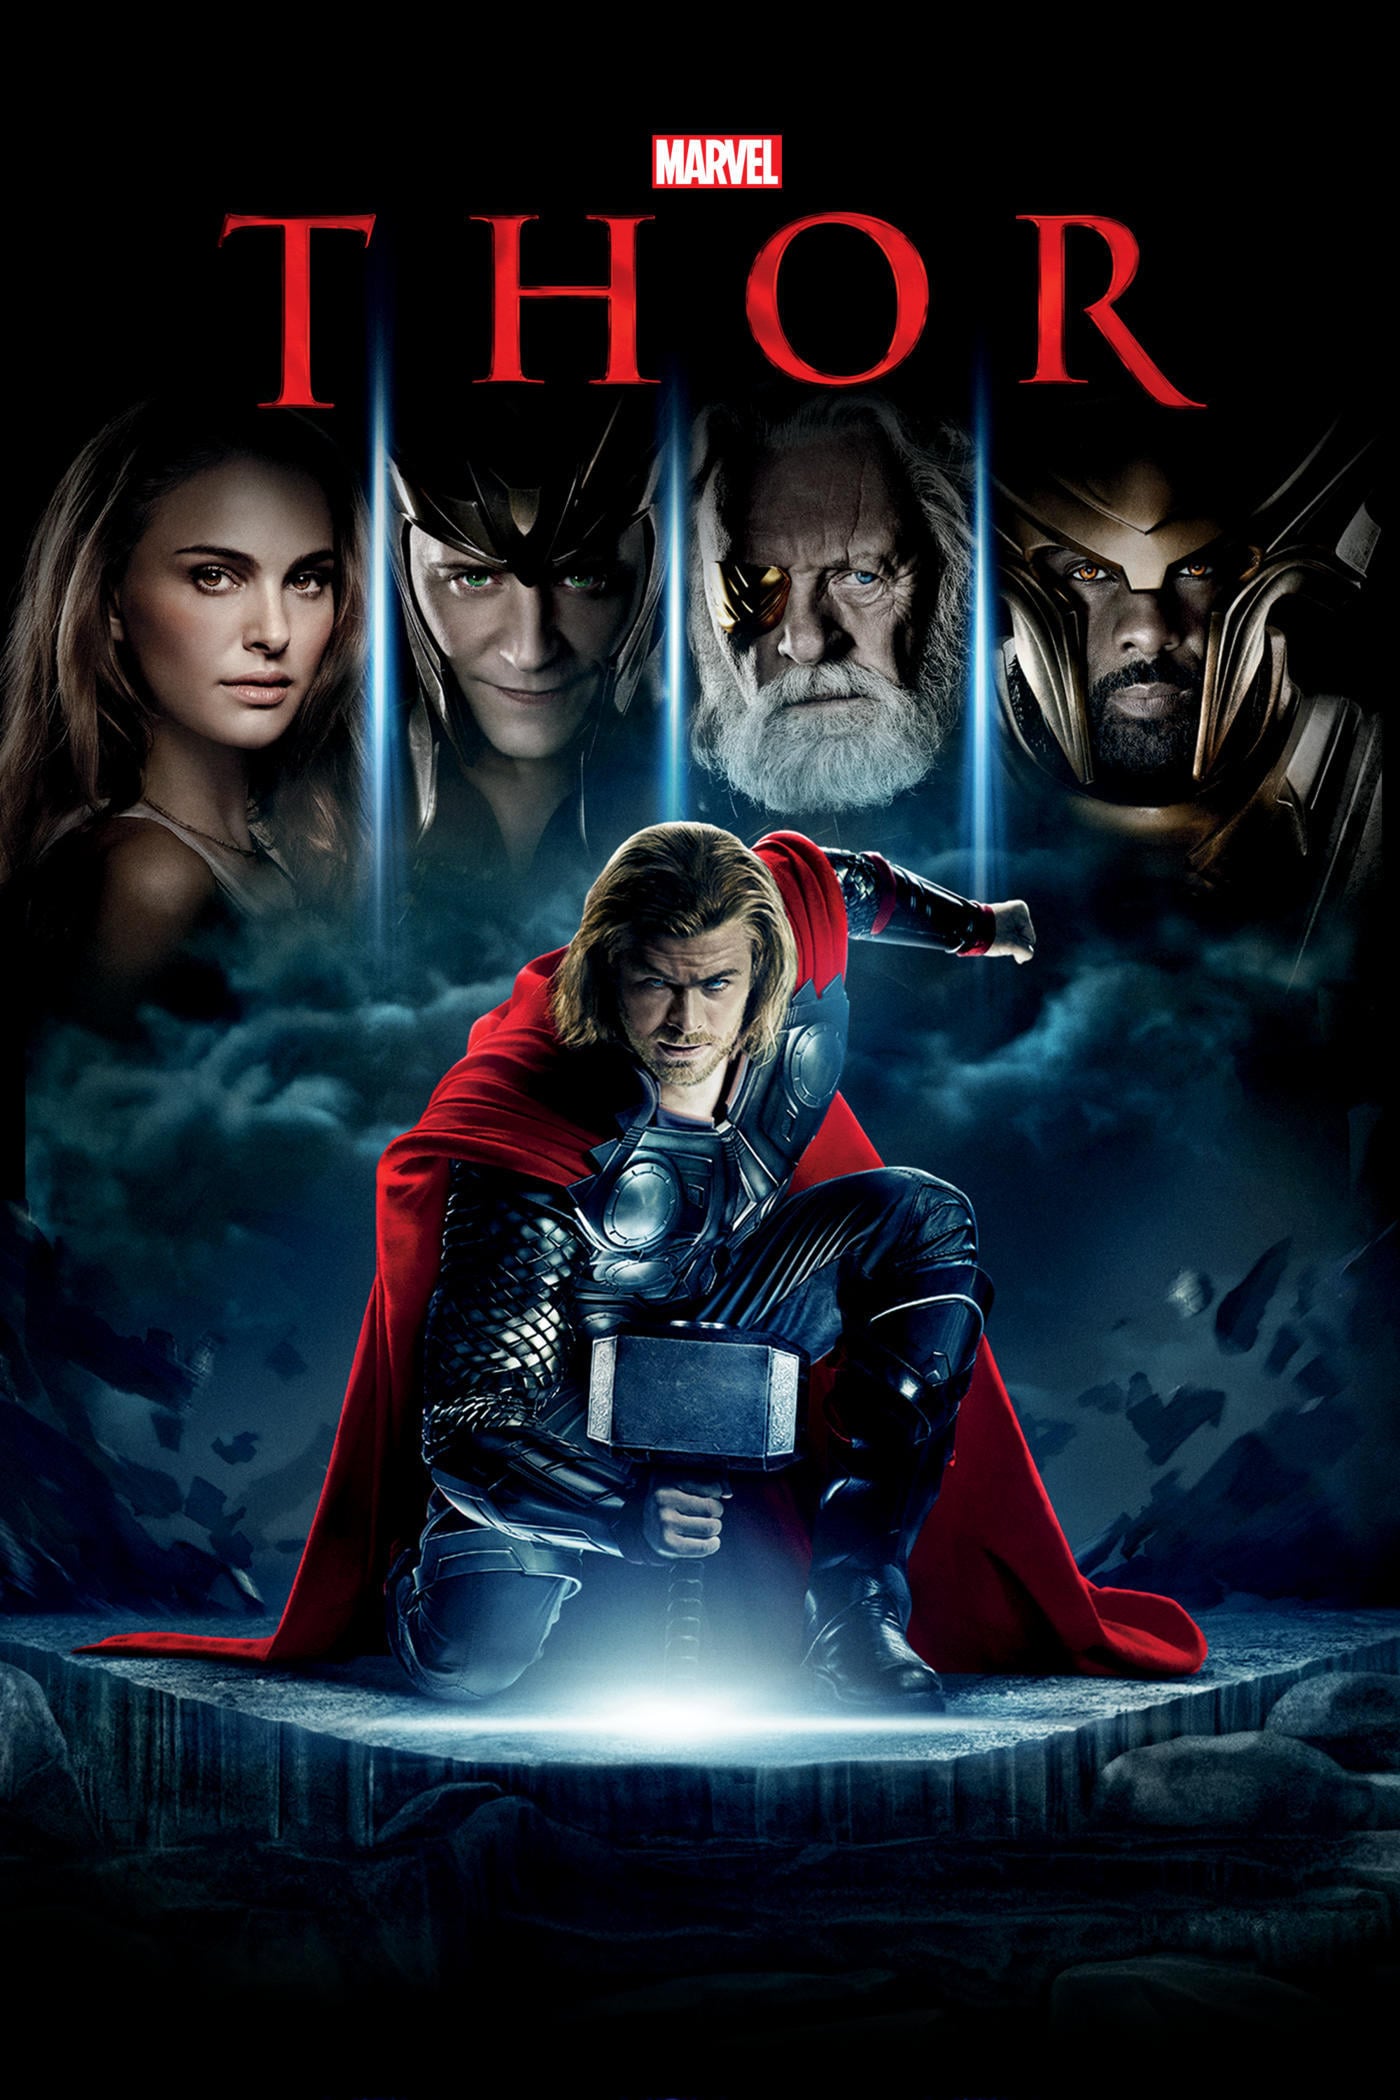 Poster for the movie "Thor"